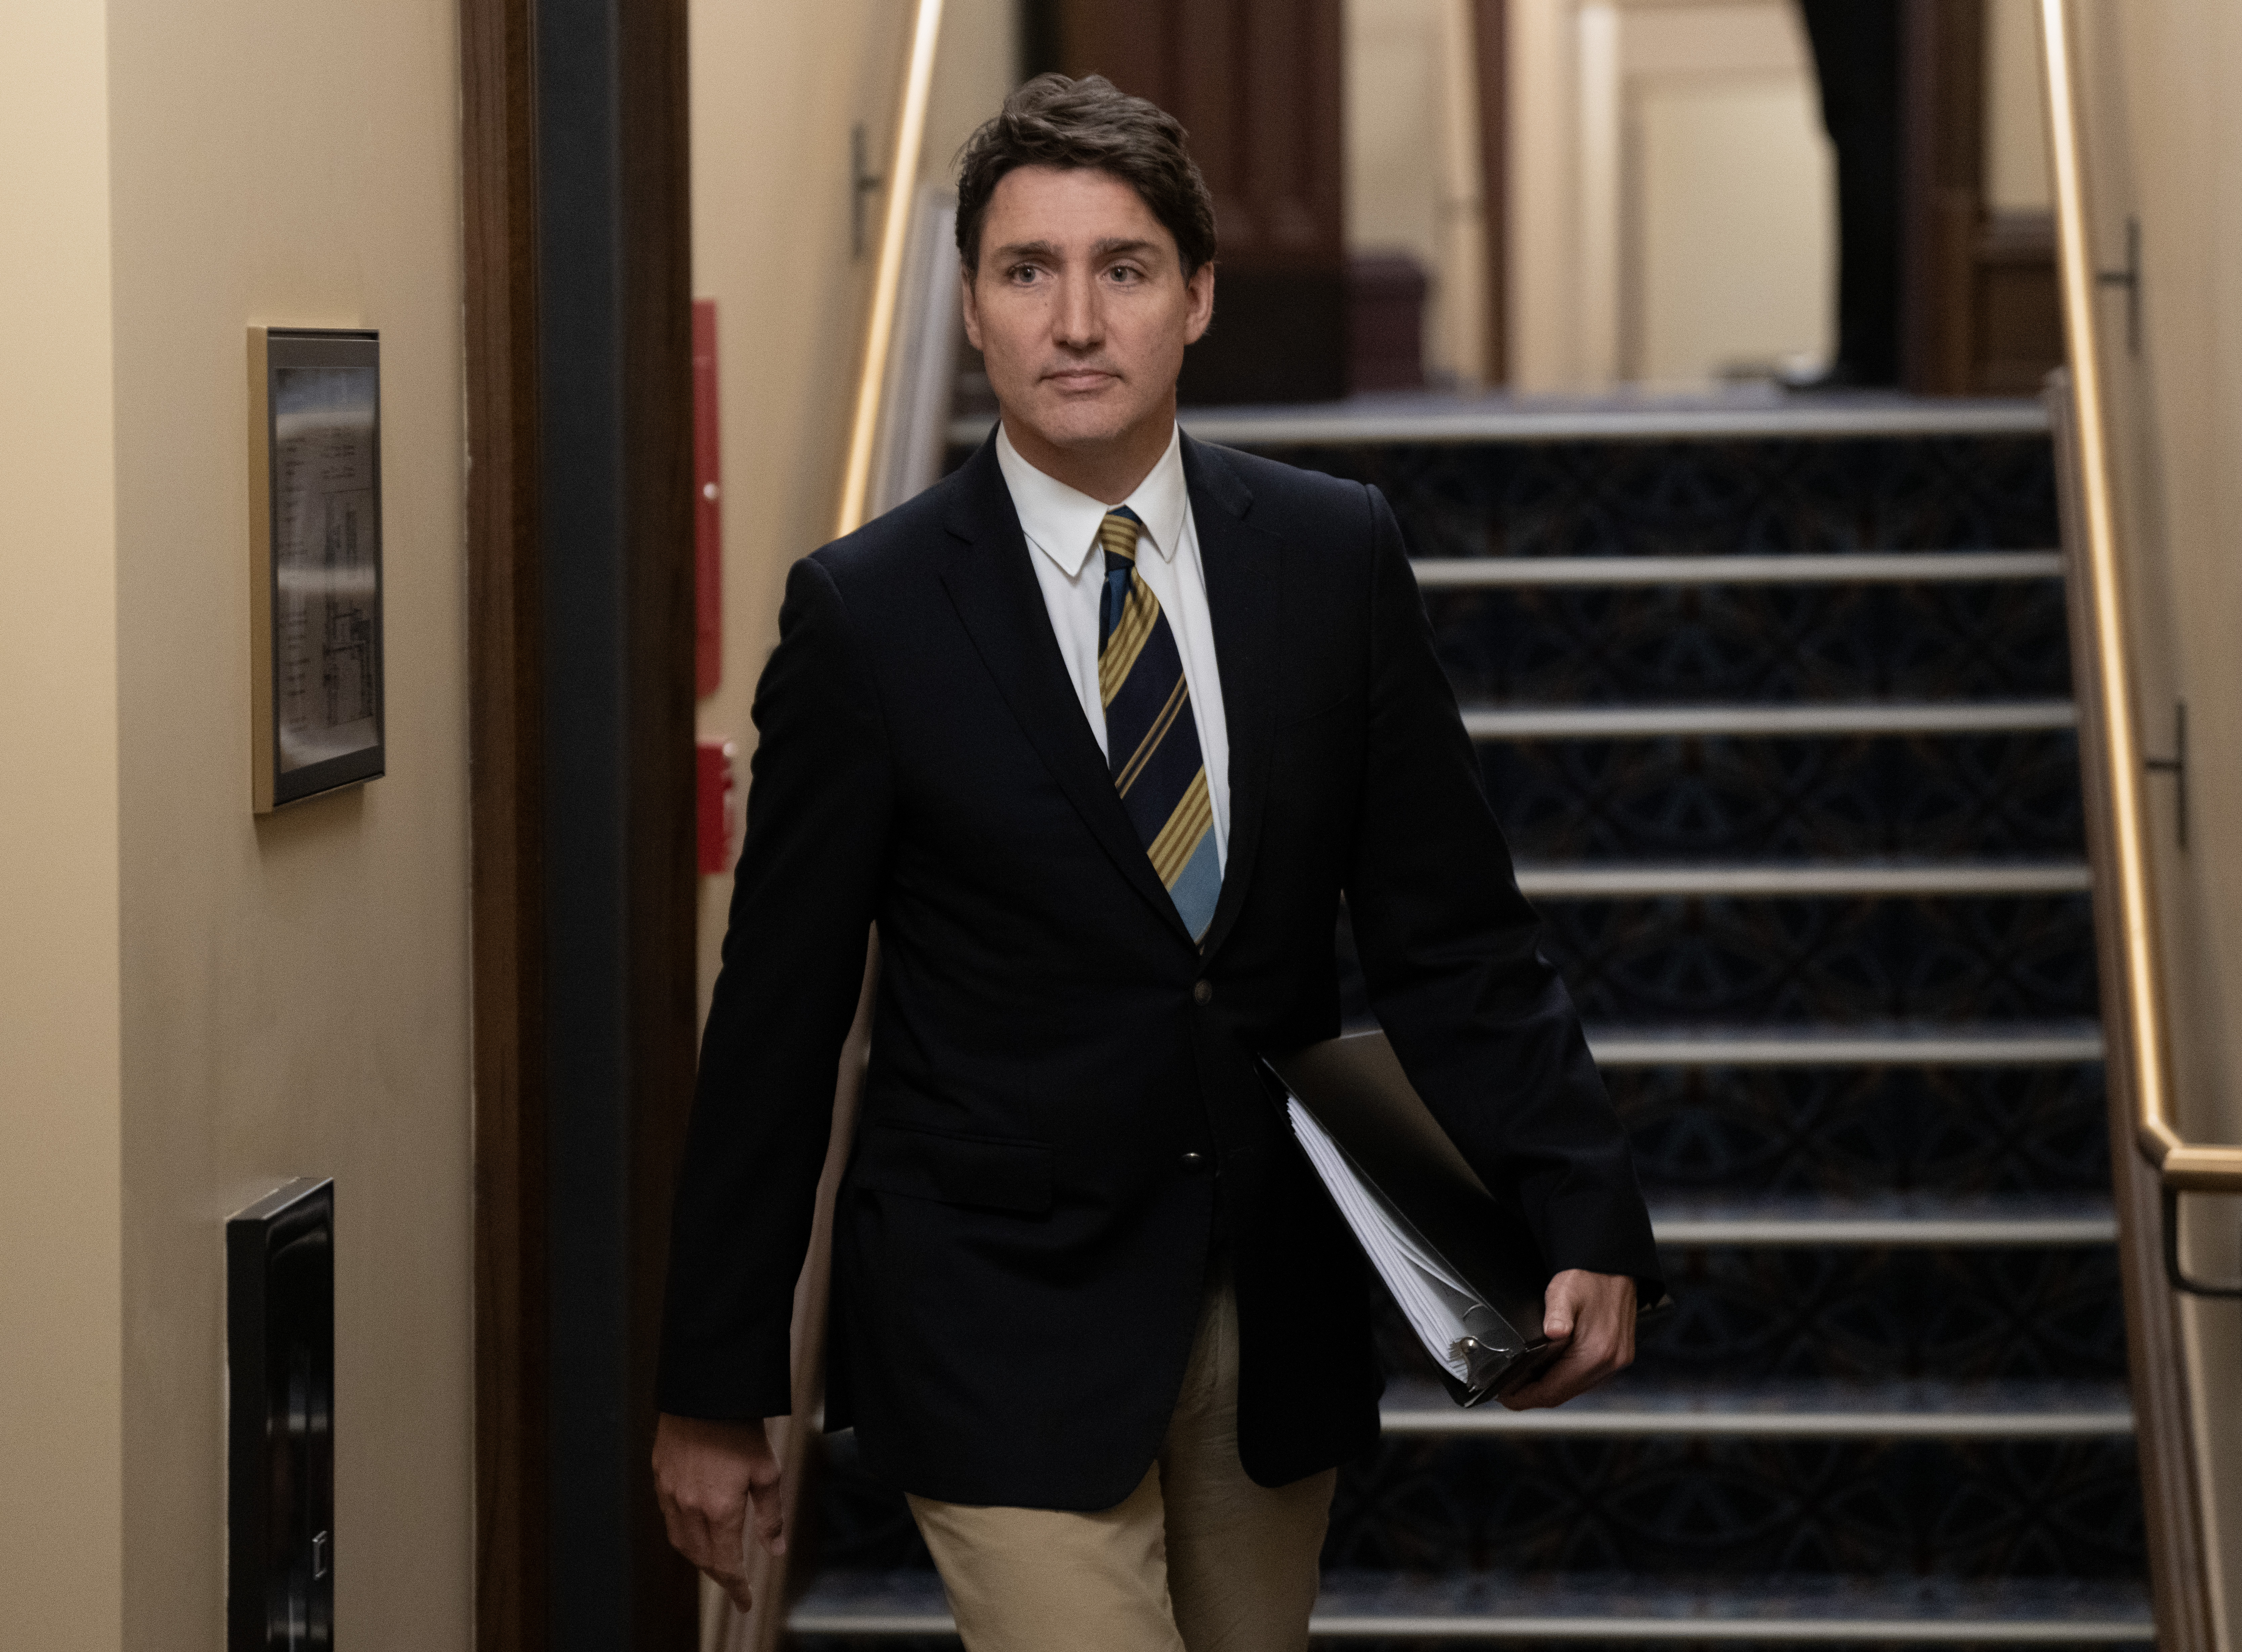 Trudeau headed for G7 summit in Italy. What’s on the agenda? 